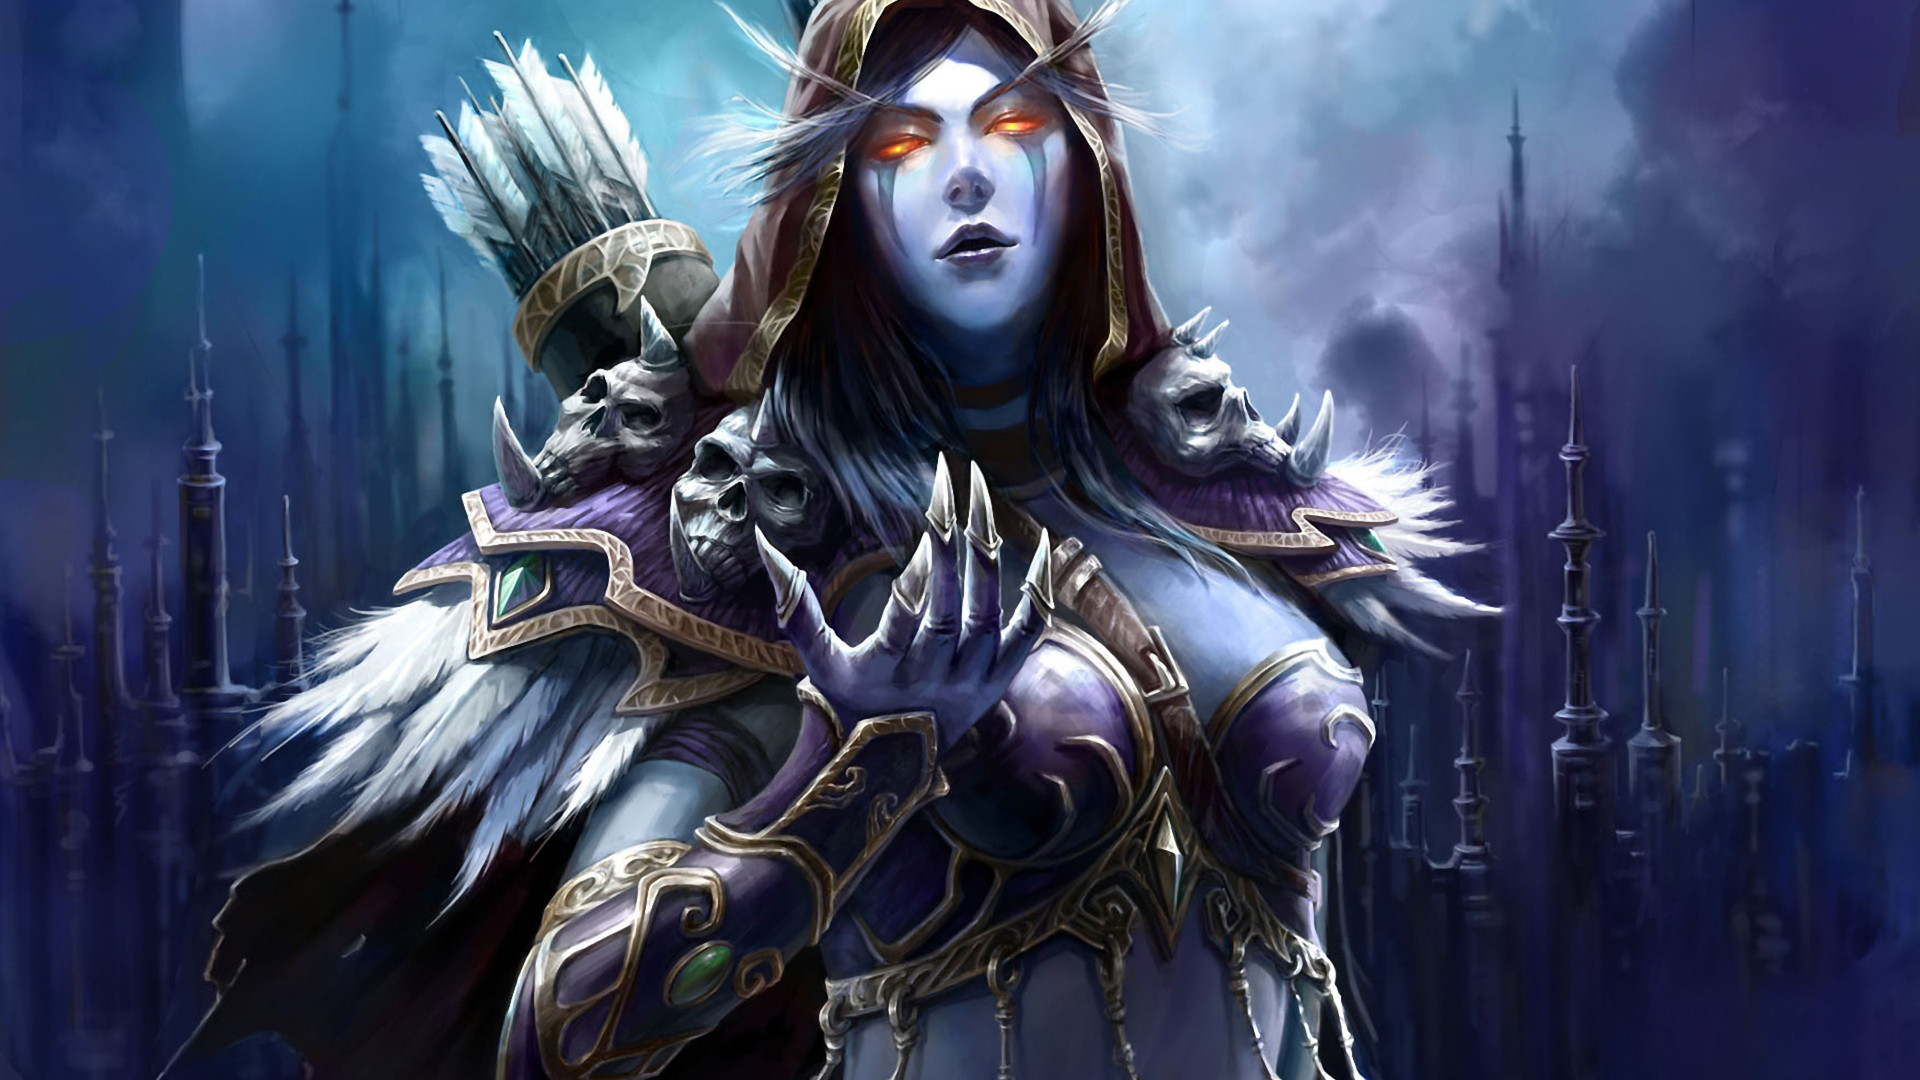 1920x1080 World of Warcraft Wallpapers HD Images Download.